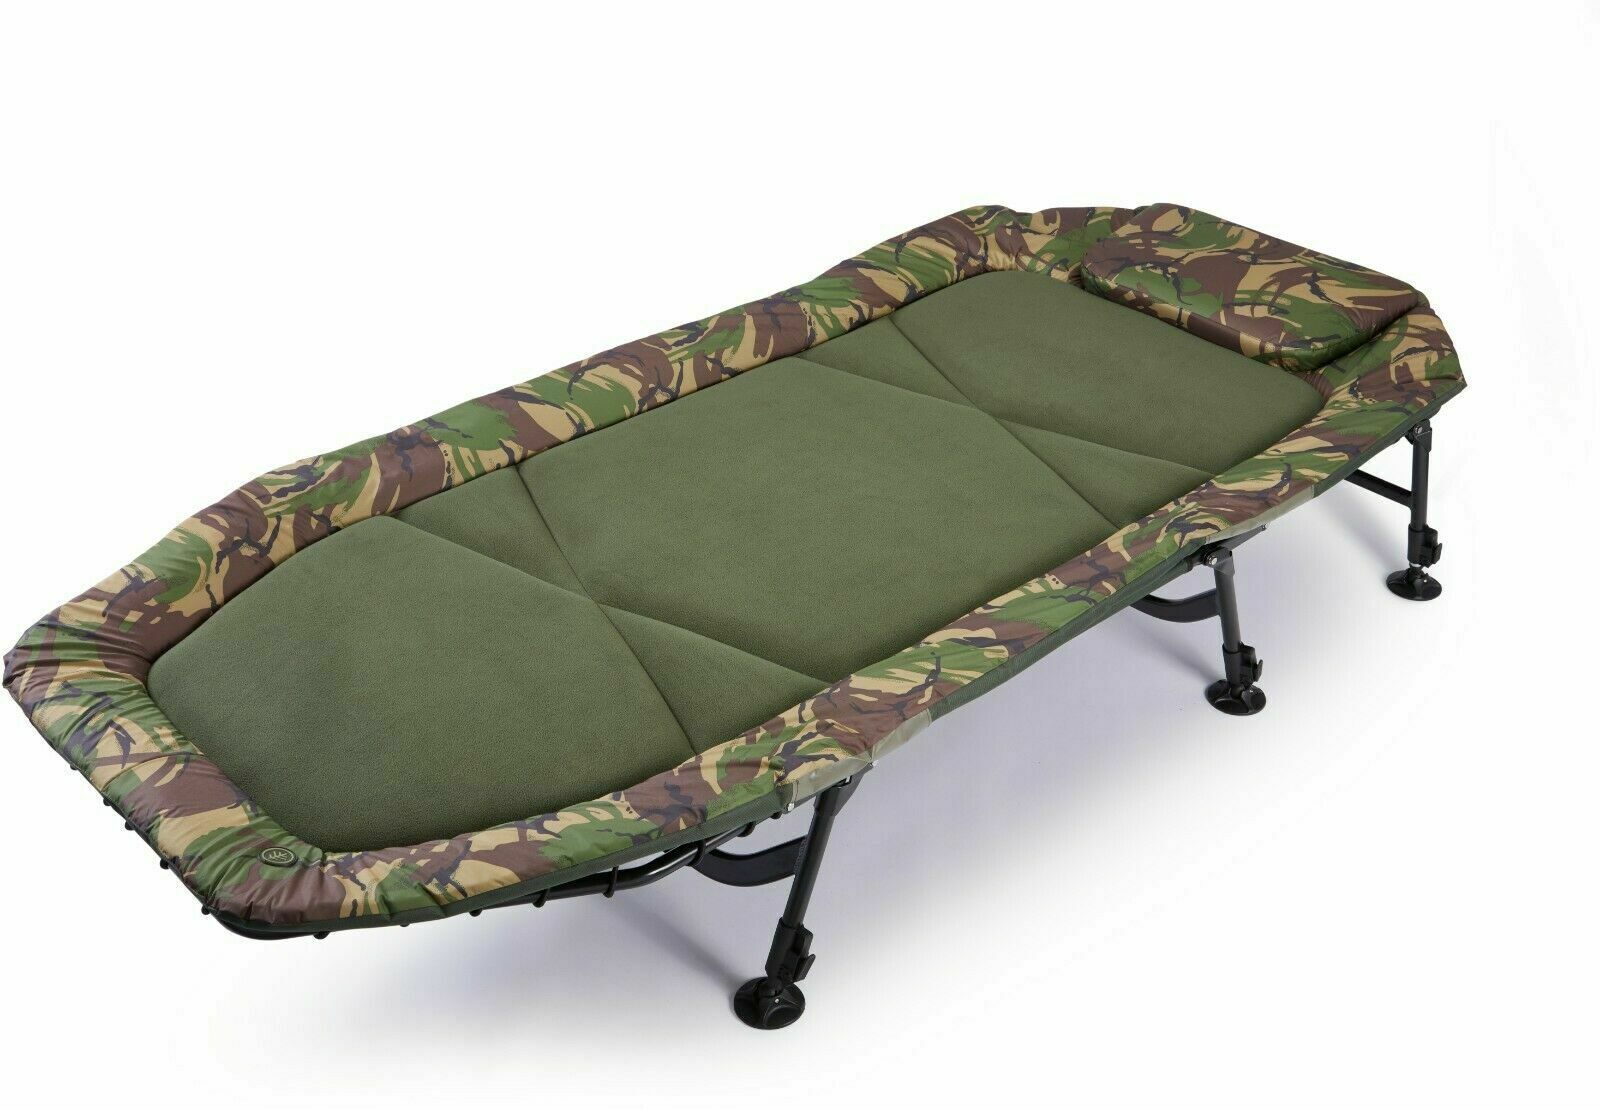 https://www.c2kft.co.uk/wp-content/uploads/imported/2/Wychwood-Tactical-X-Flatbed-Carp-Fishing-Bedchair-Compact-All-Models-in-stock-184216133722.JPG